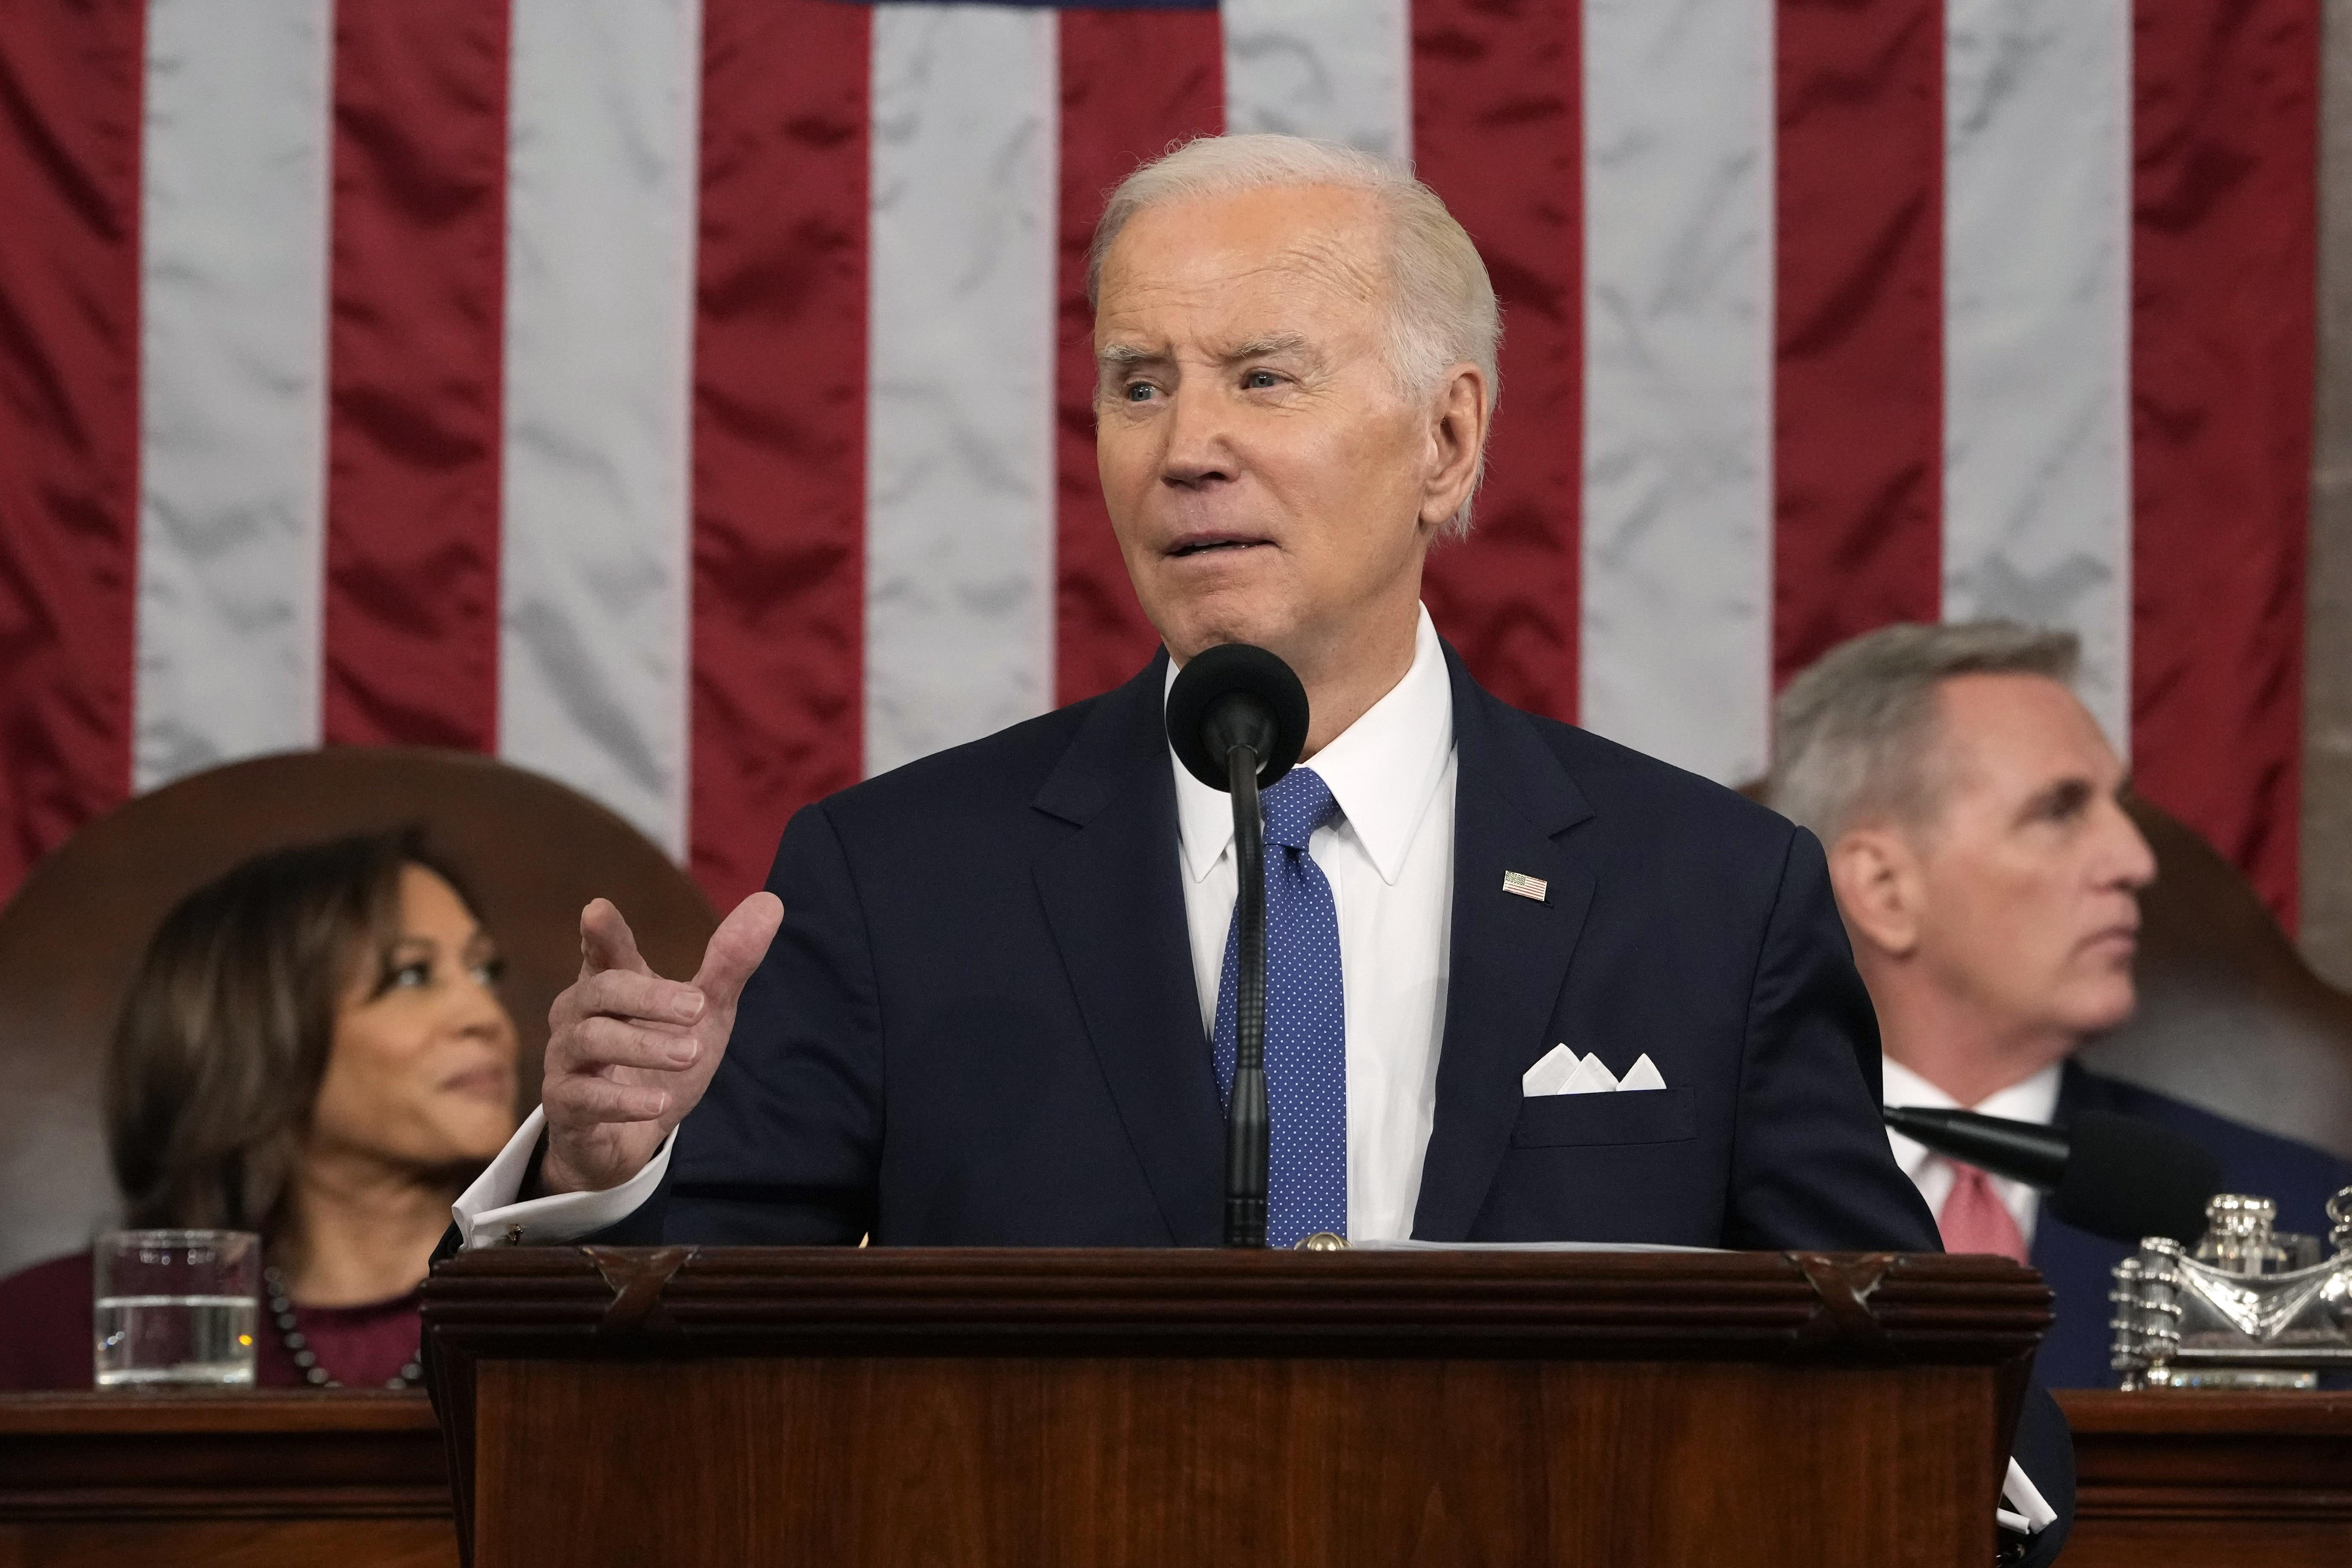 Joe Biden delivering the State of the Union, pointing at the crowd.